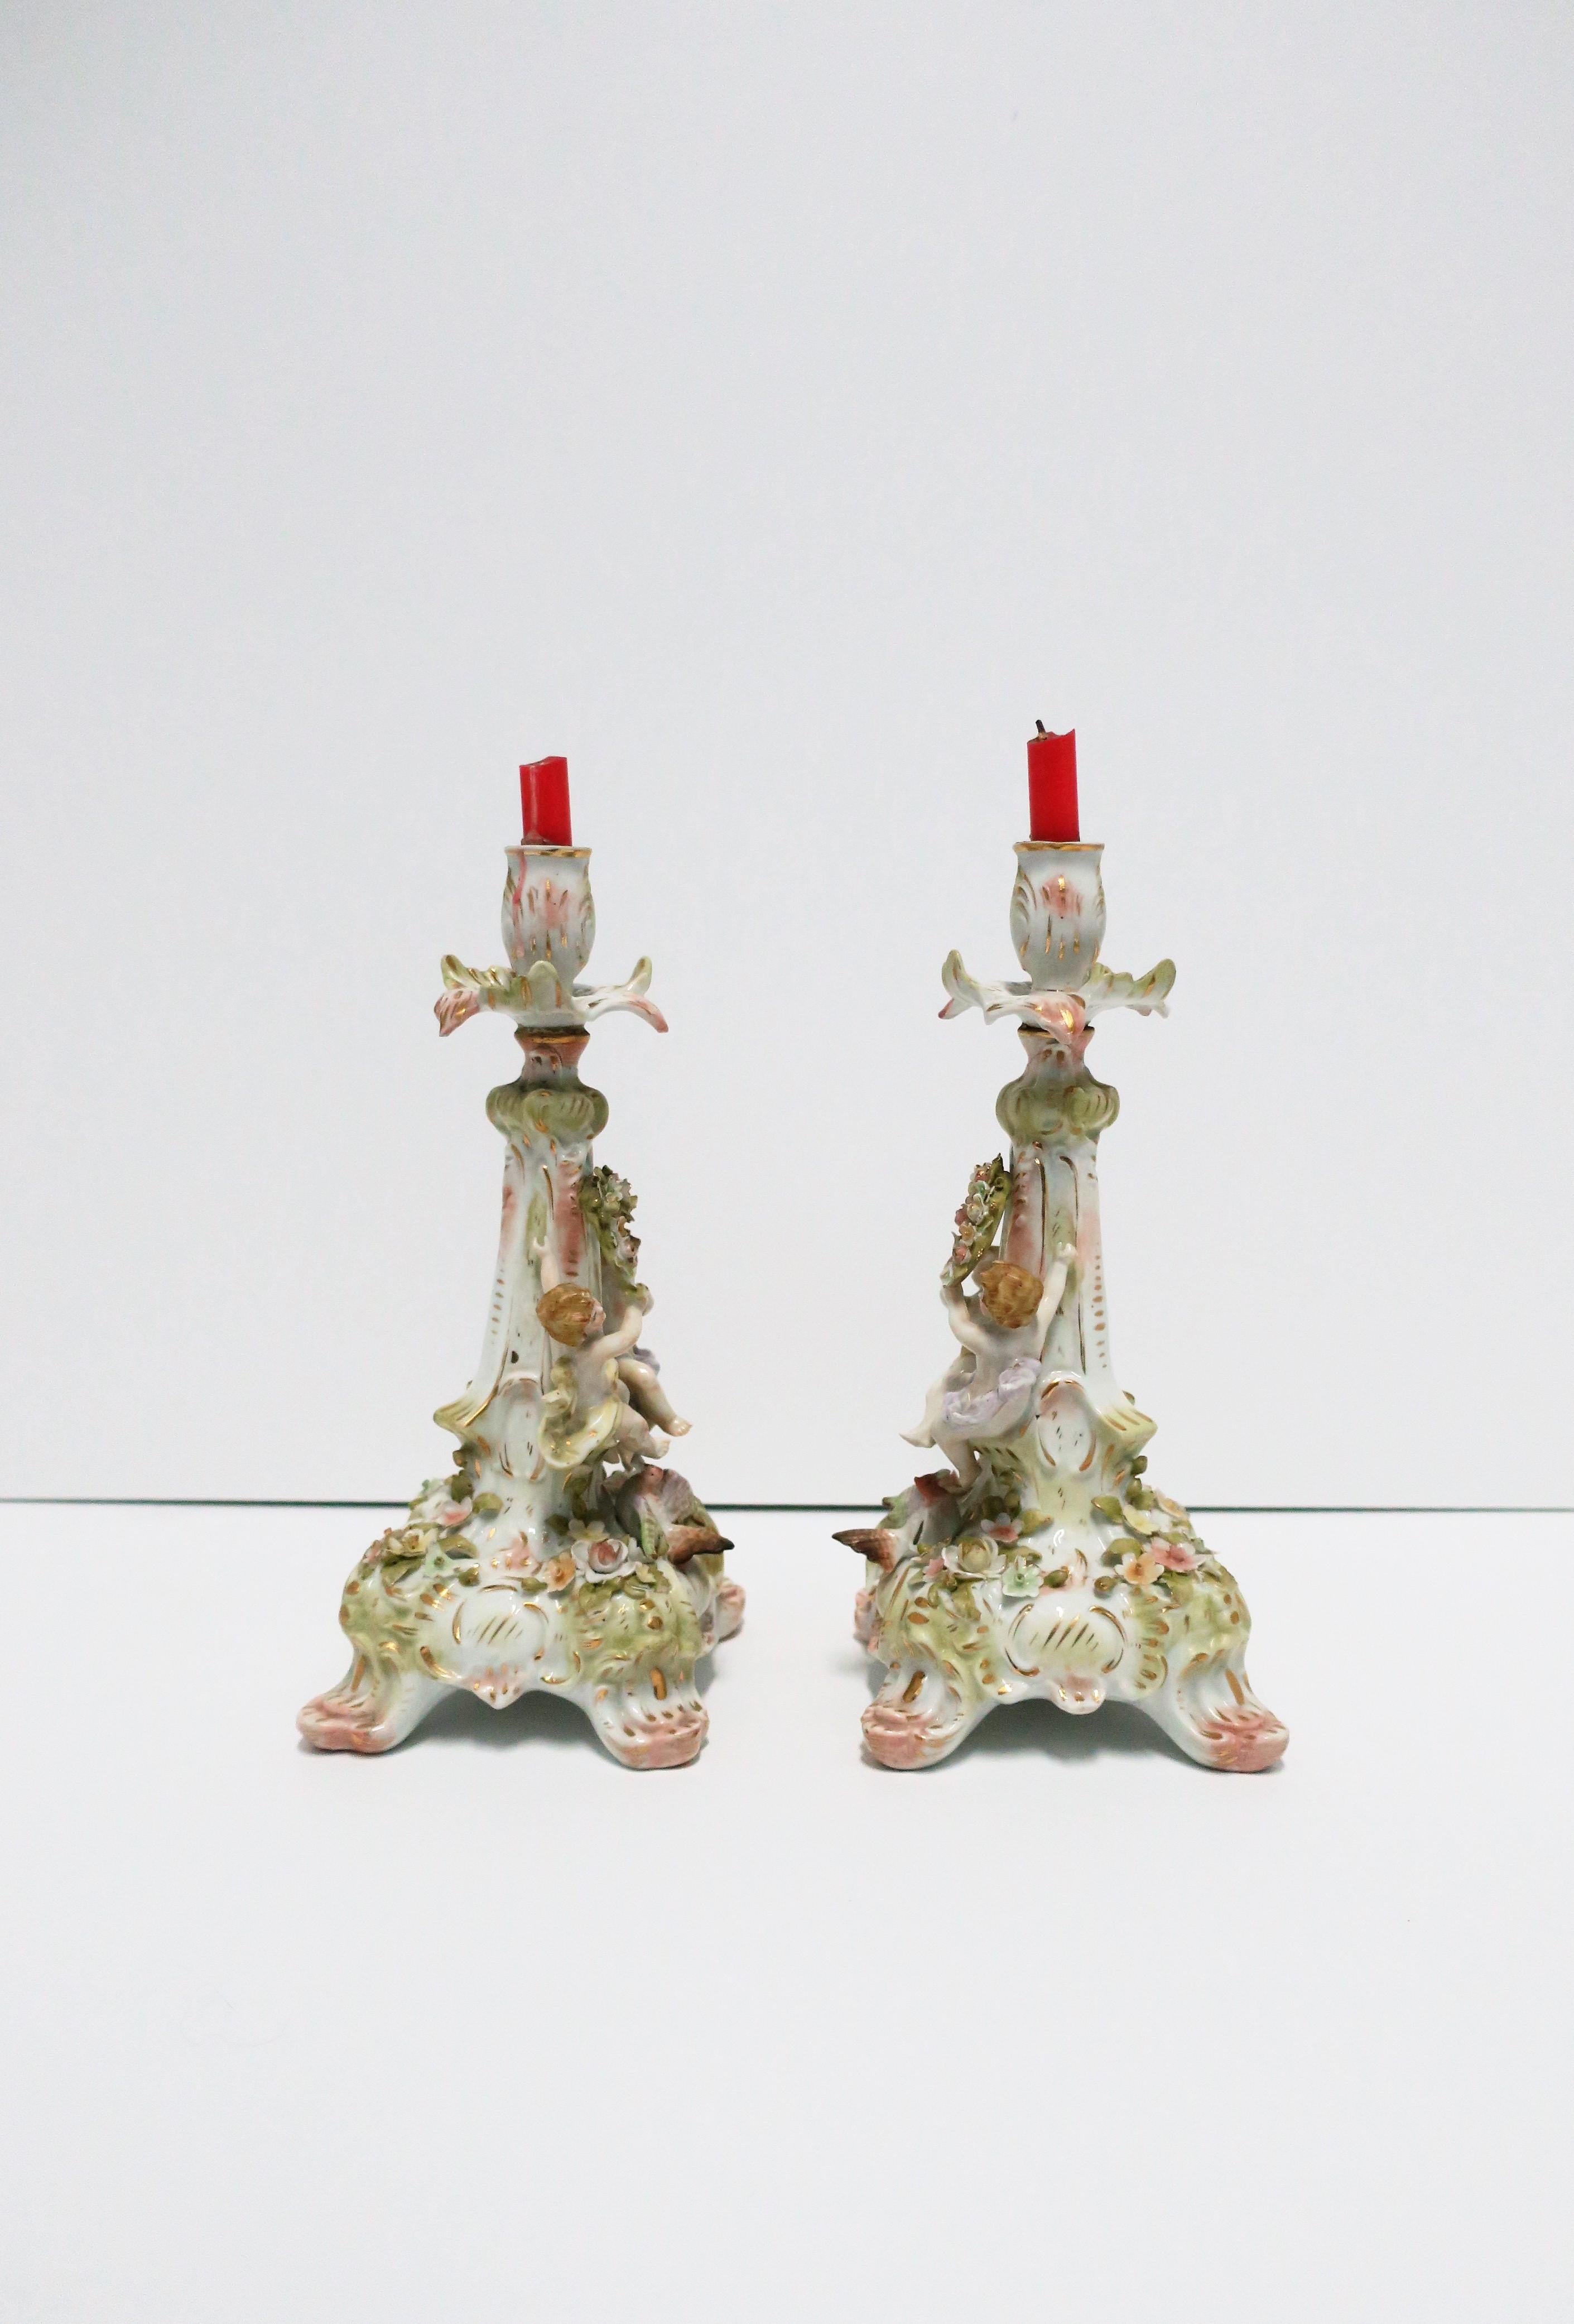 Antique Rococo German Porcelain Candlesticks Holders with Putti, Pair  For Sale 4